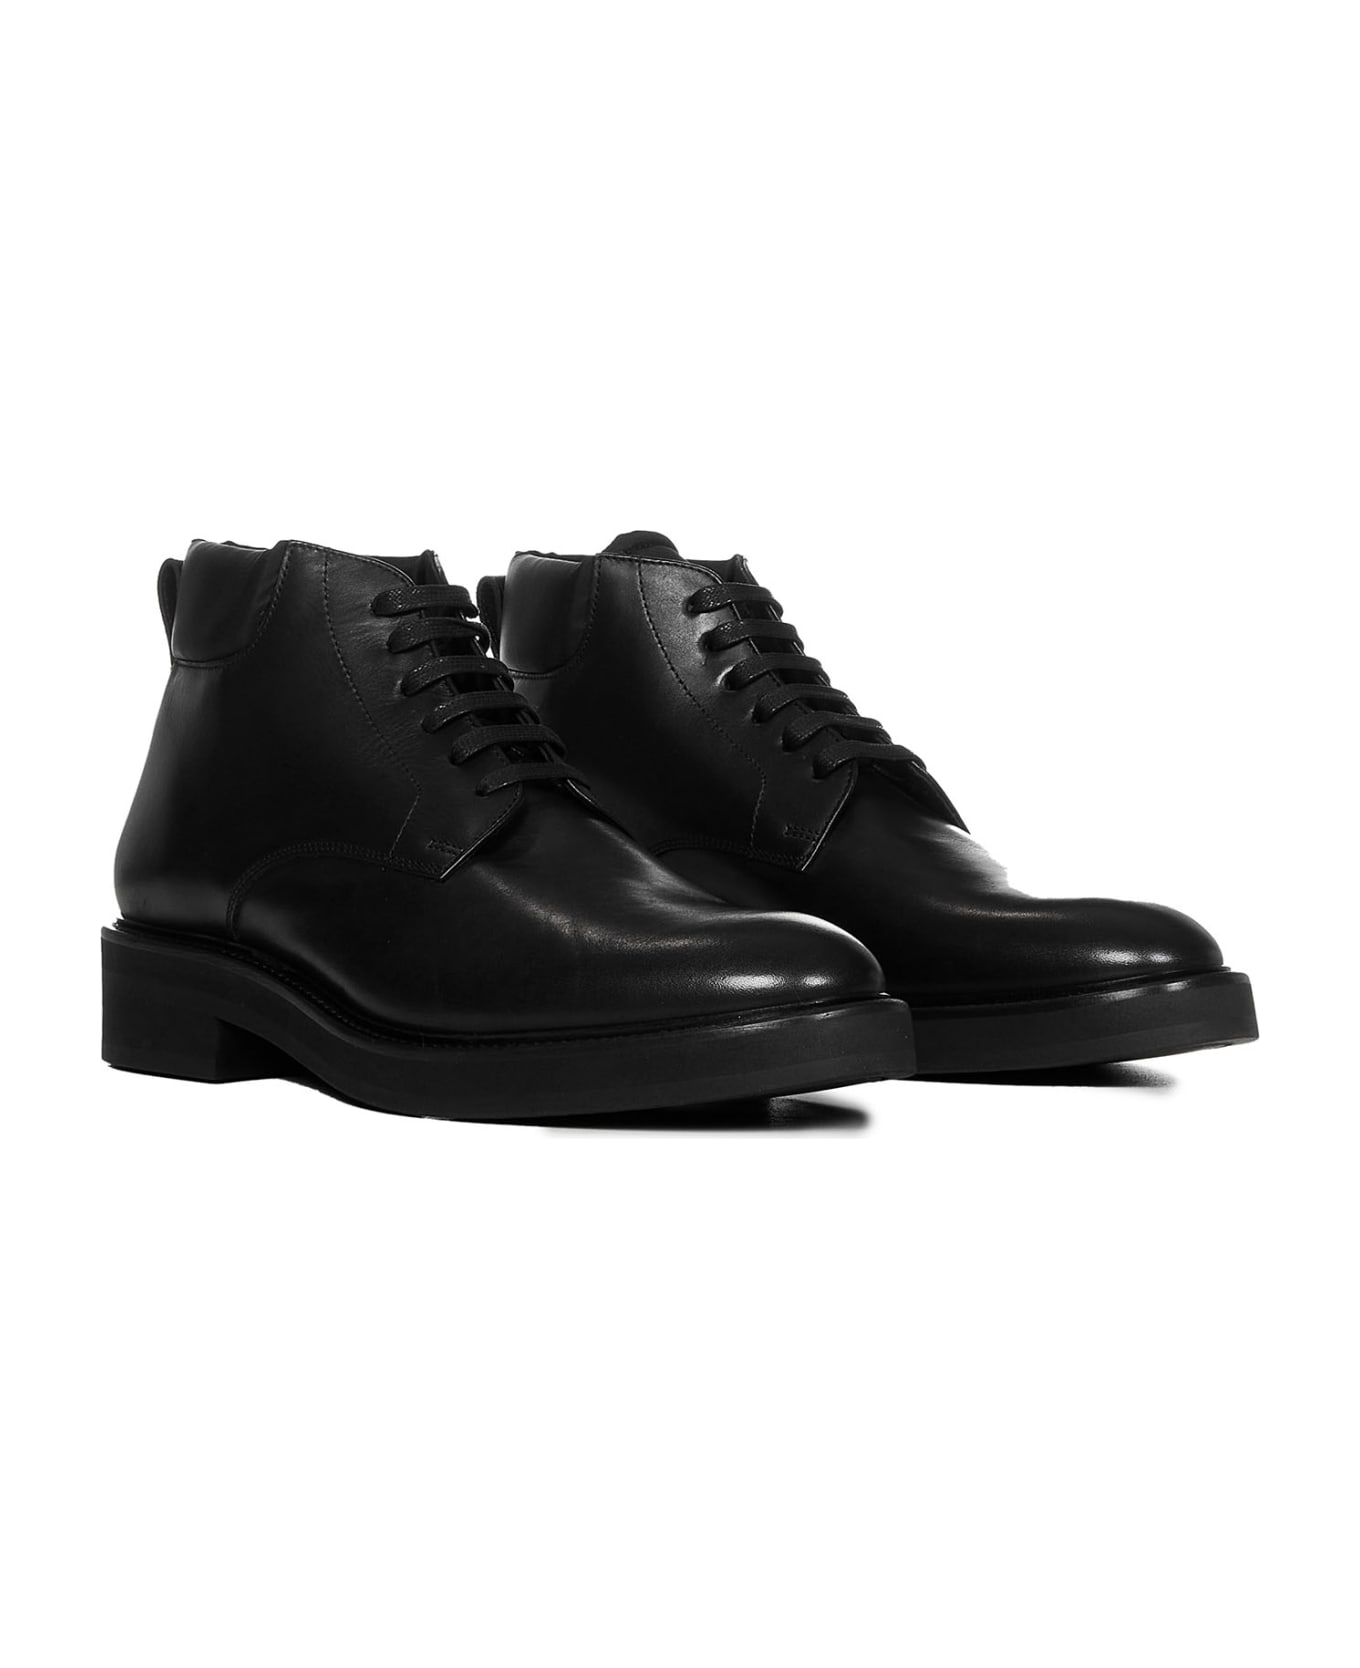 Dsquared2 Manchester City Boots - Black